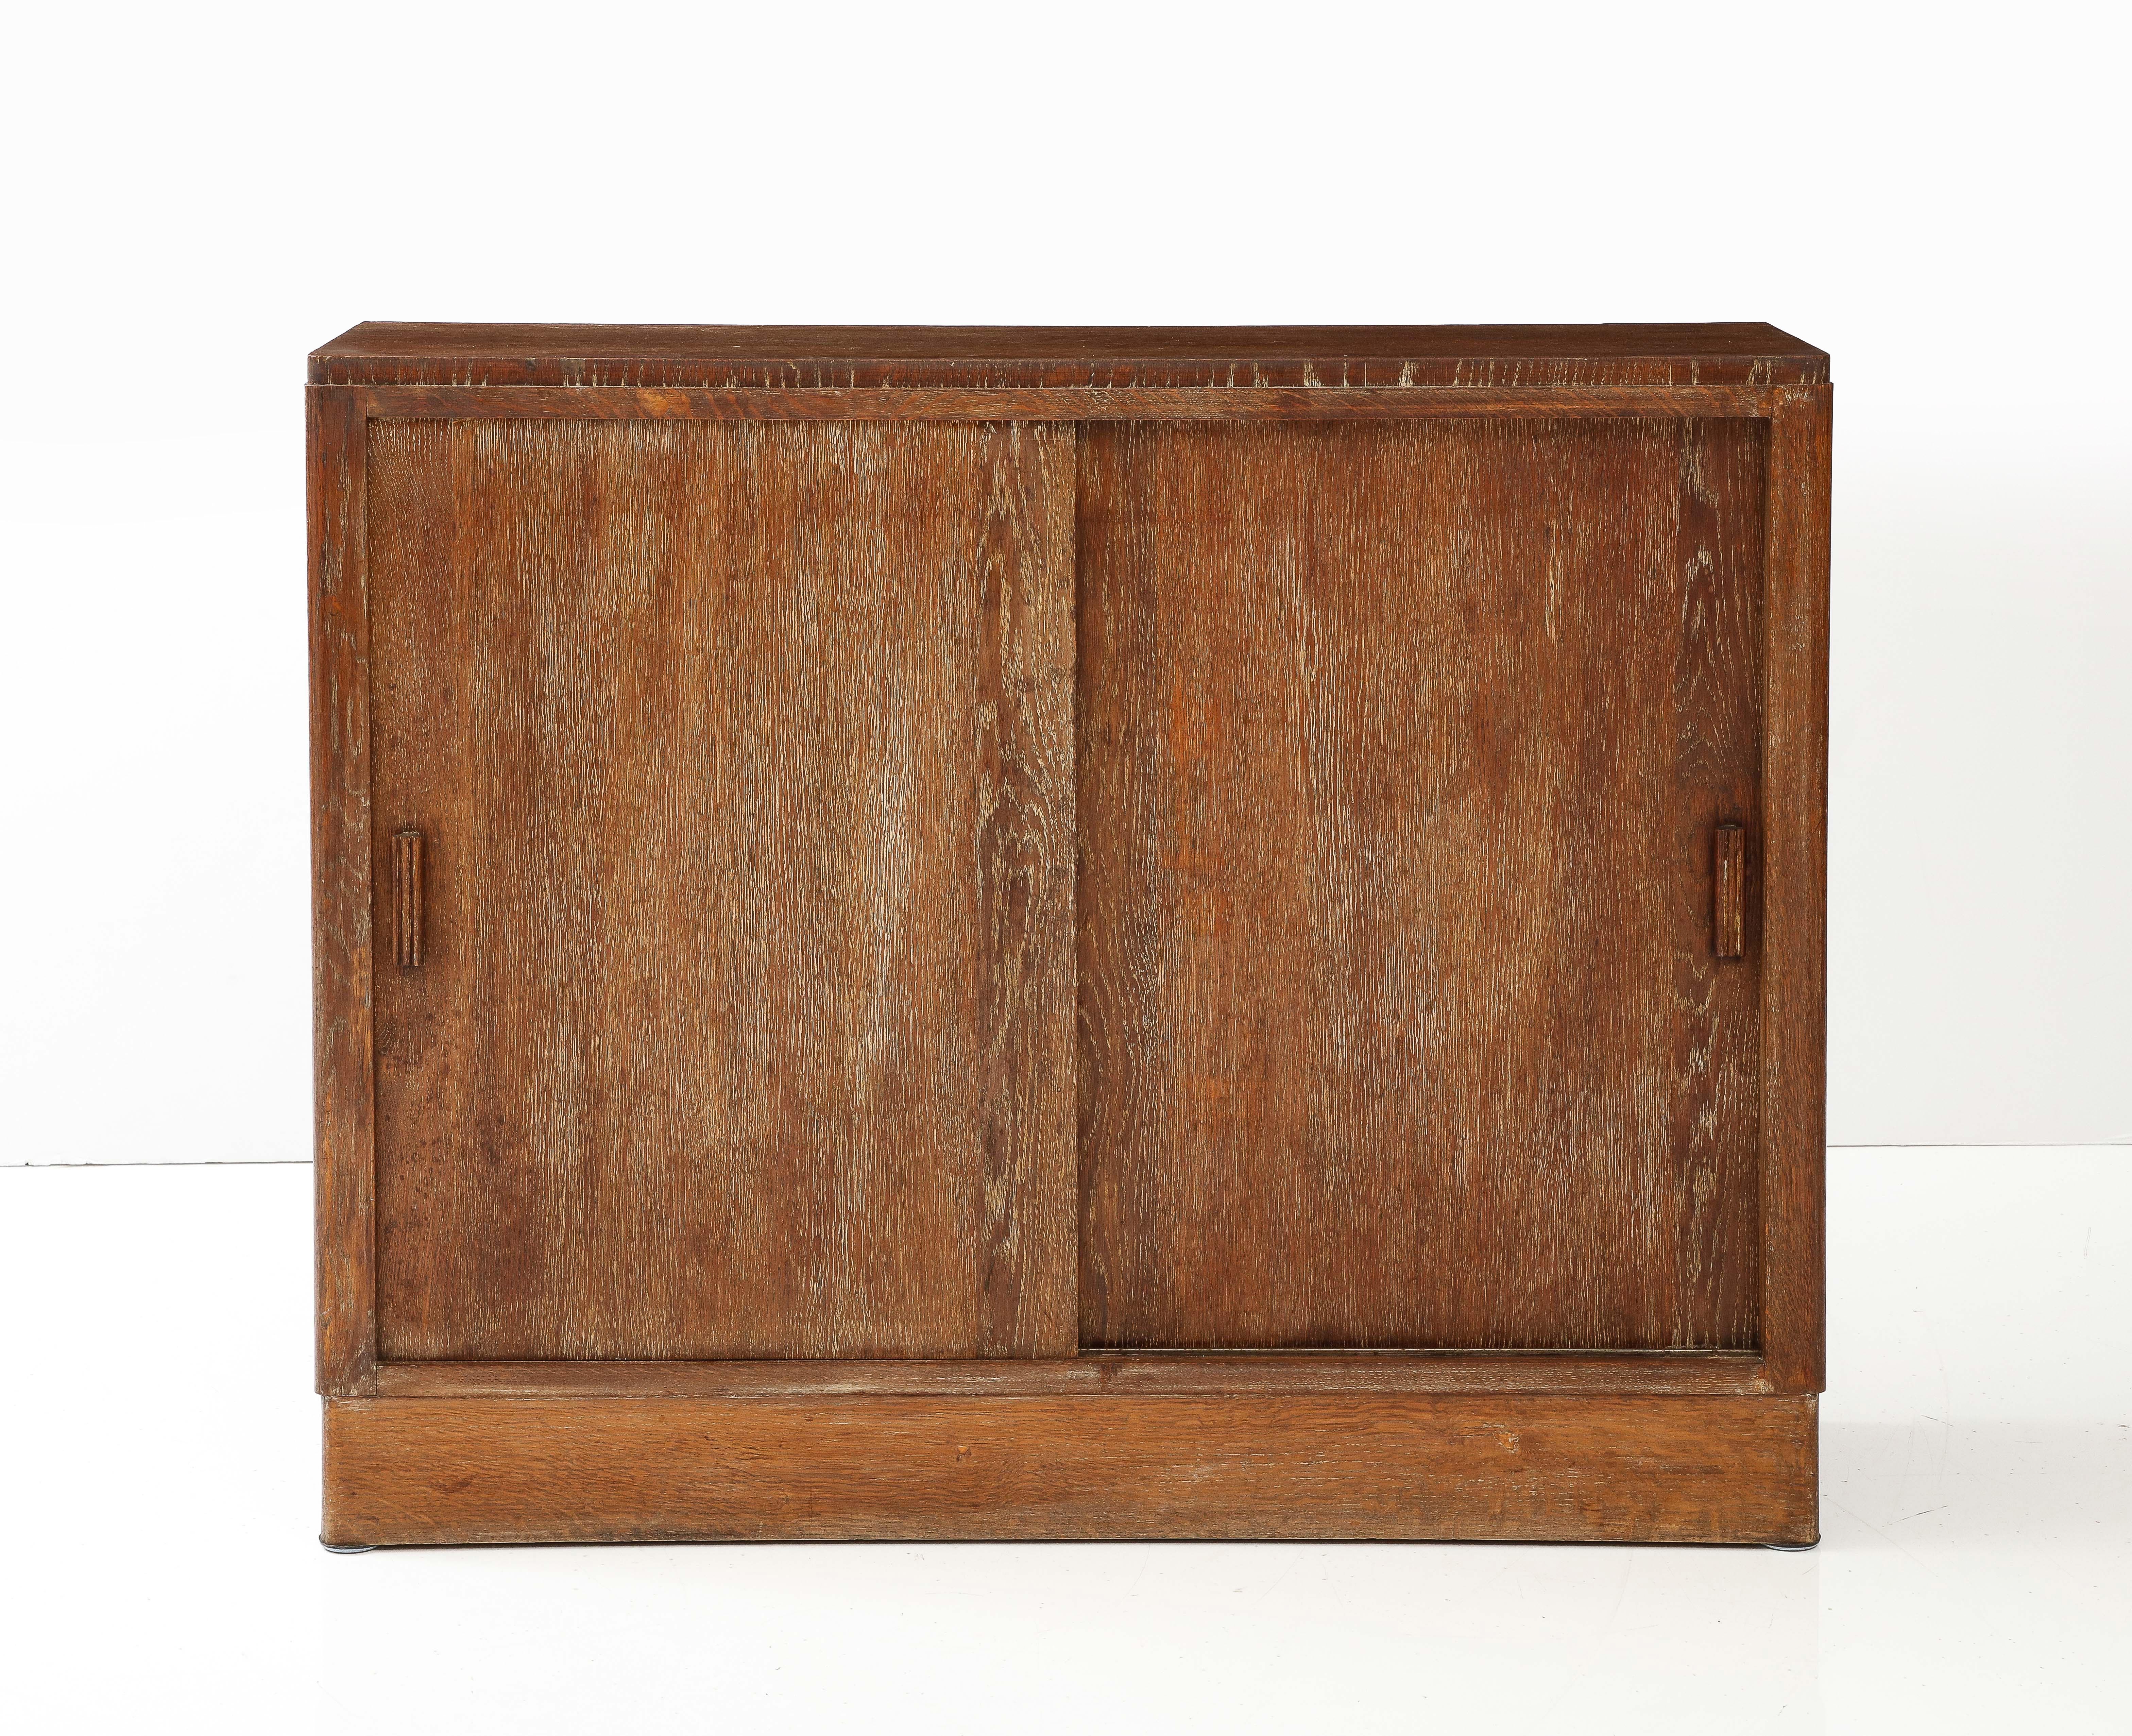 Pair of French Limed Oak Cabinets, France, c. 1930-40's
Oak, Interior shelves, Interior Drawers

H: 37 D: 13.5 W: 46 in.